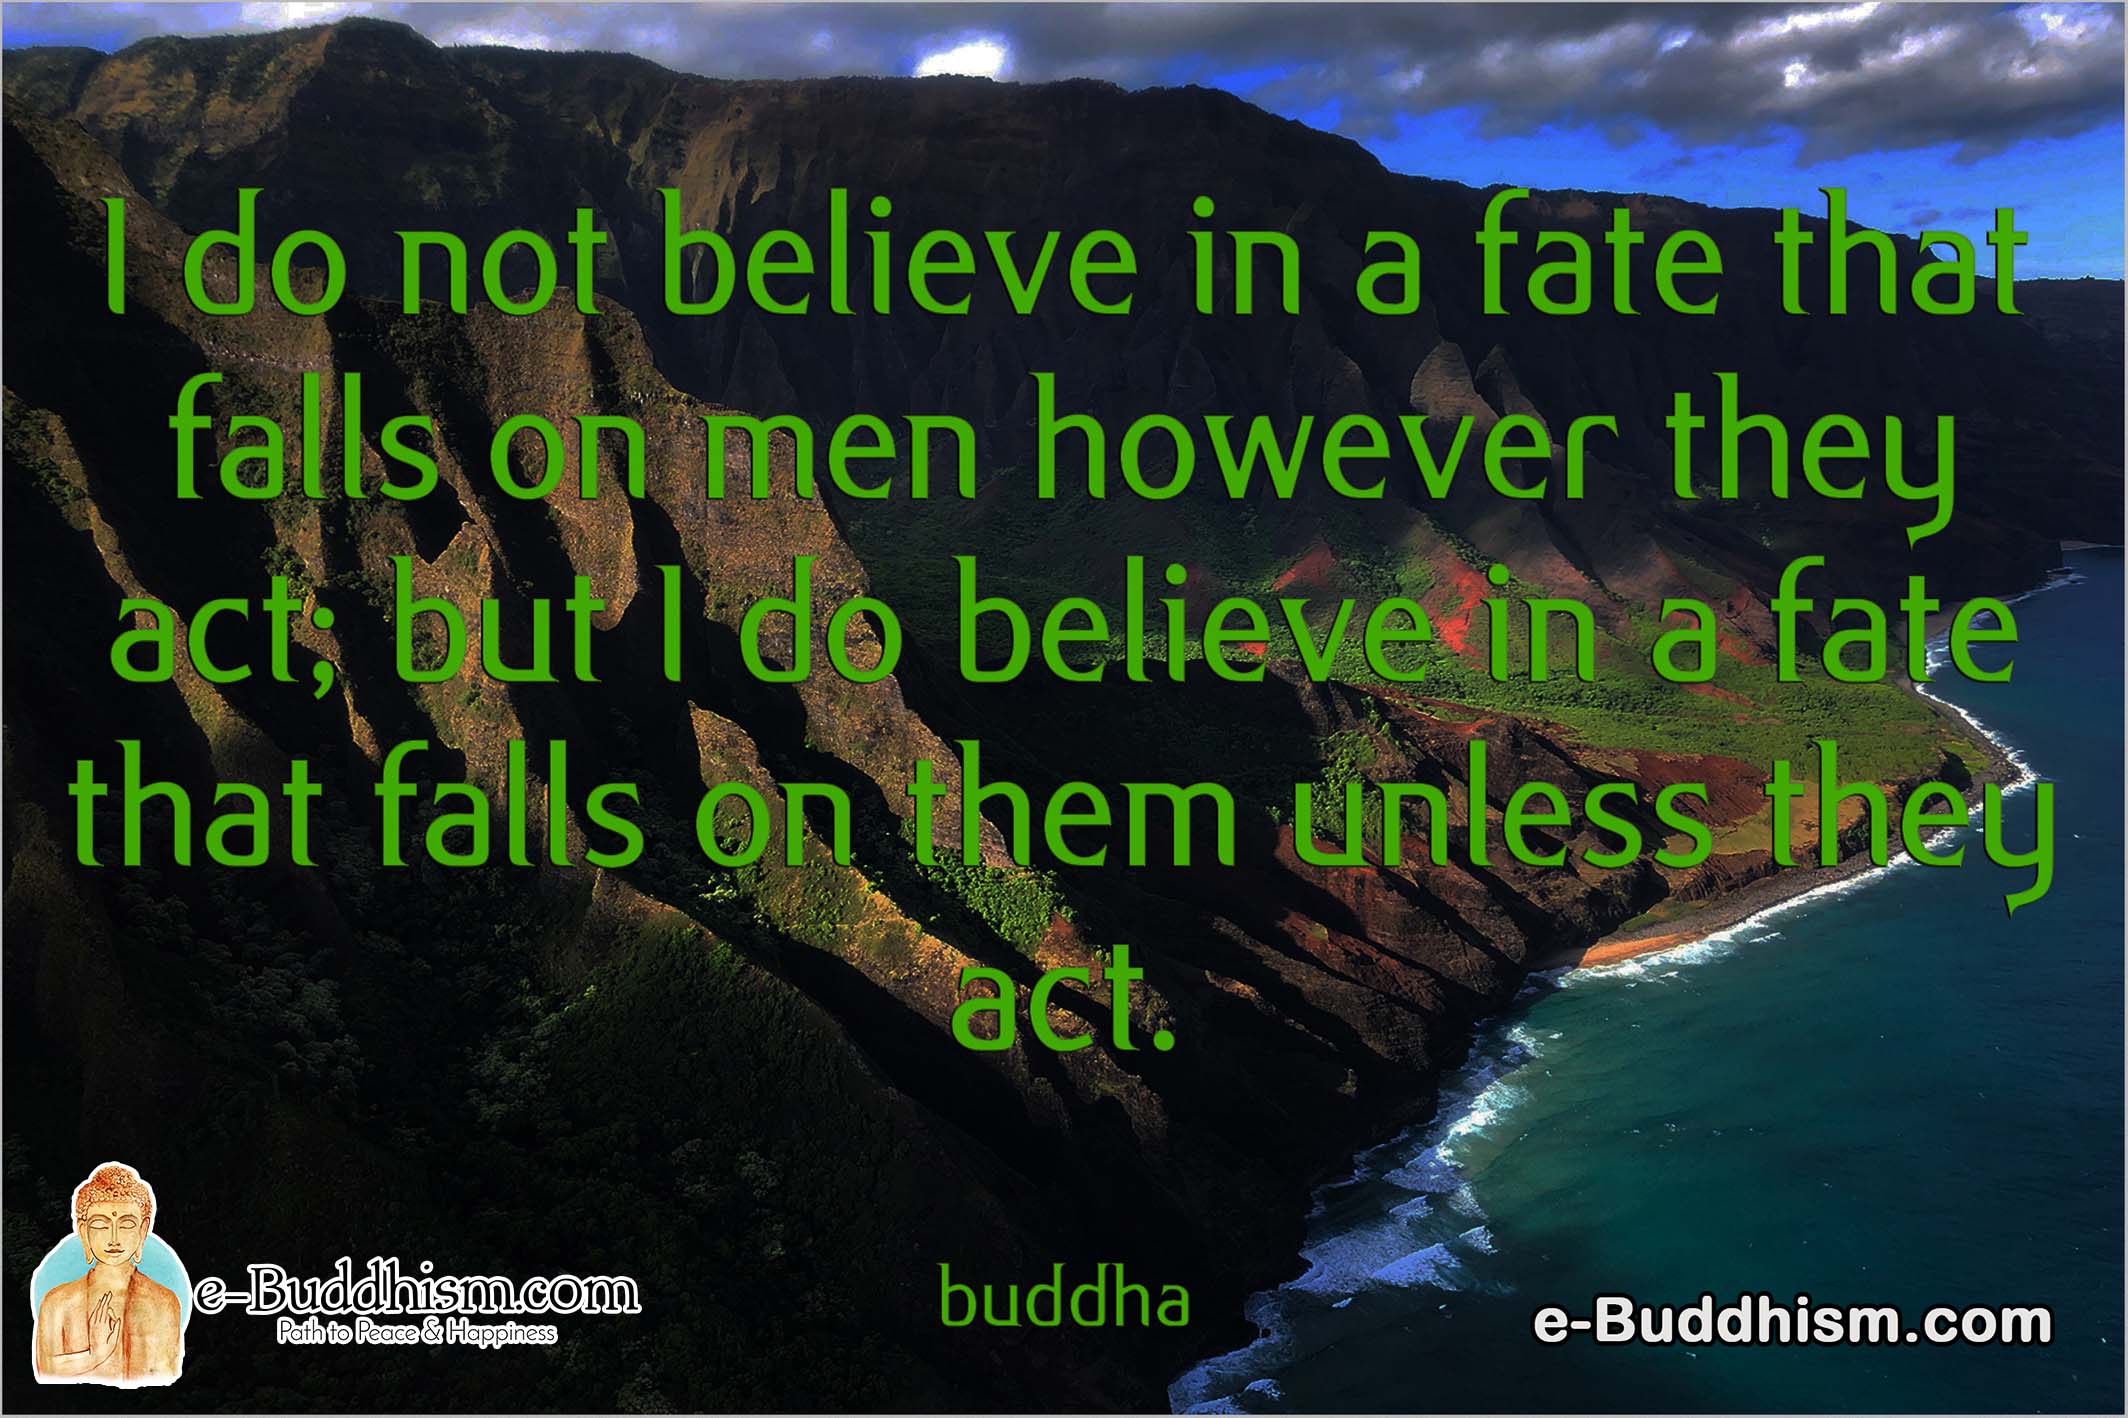 I do not believe in a fate that falls on men however they act, but I do believe in a future that falls on them unless they work. -Buddha